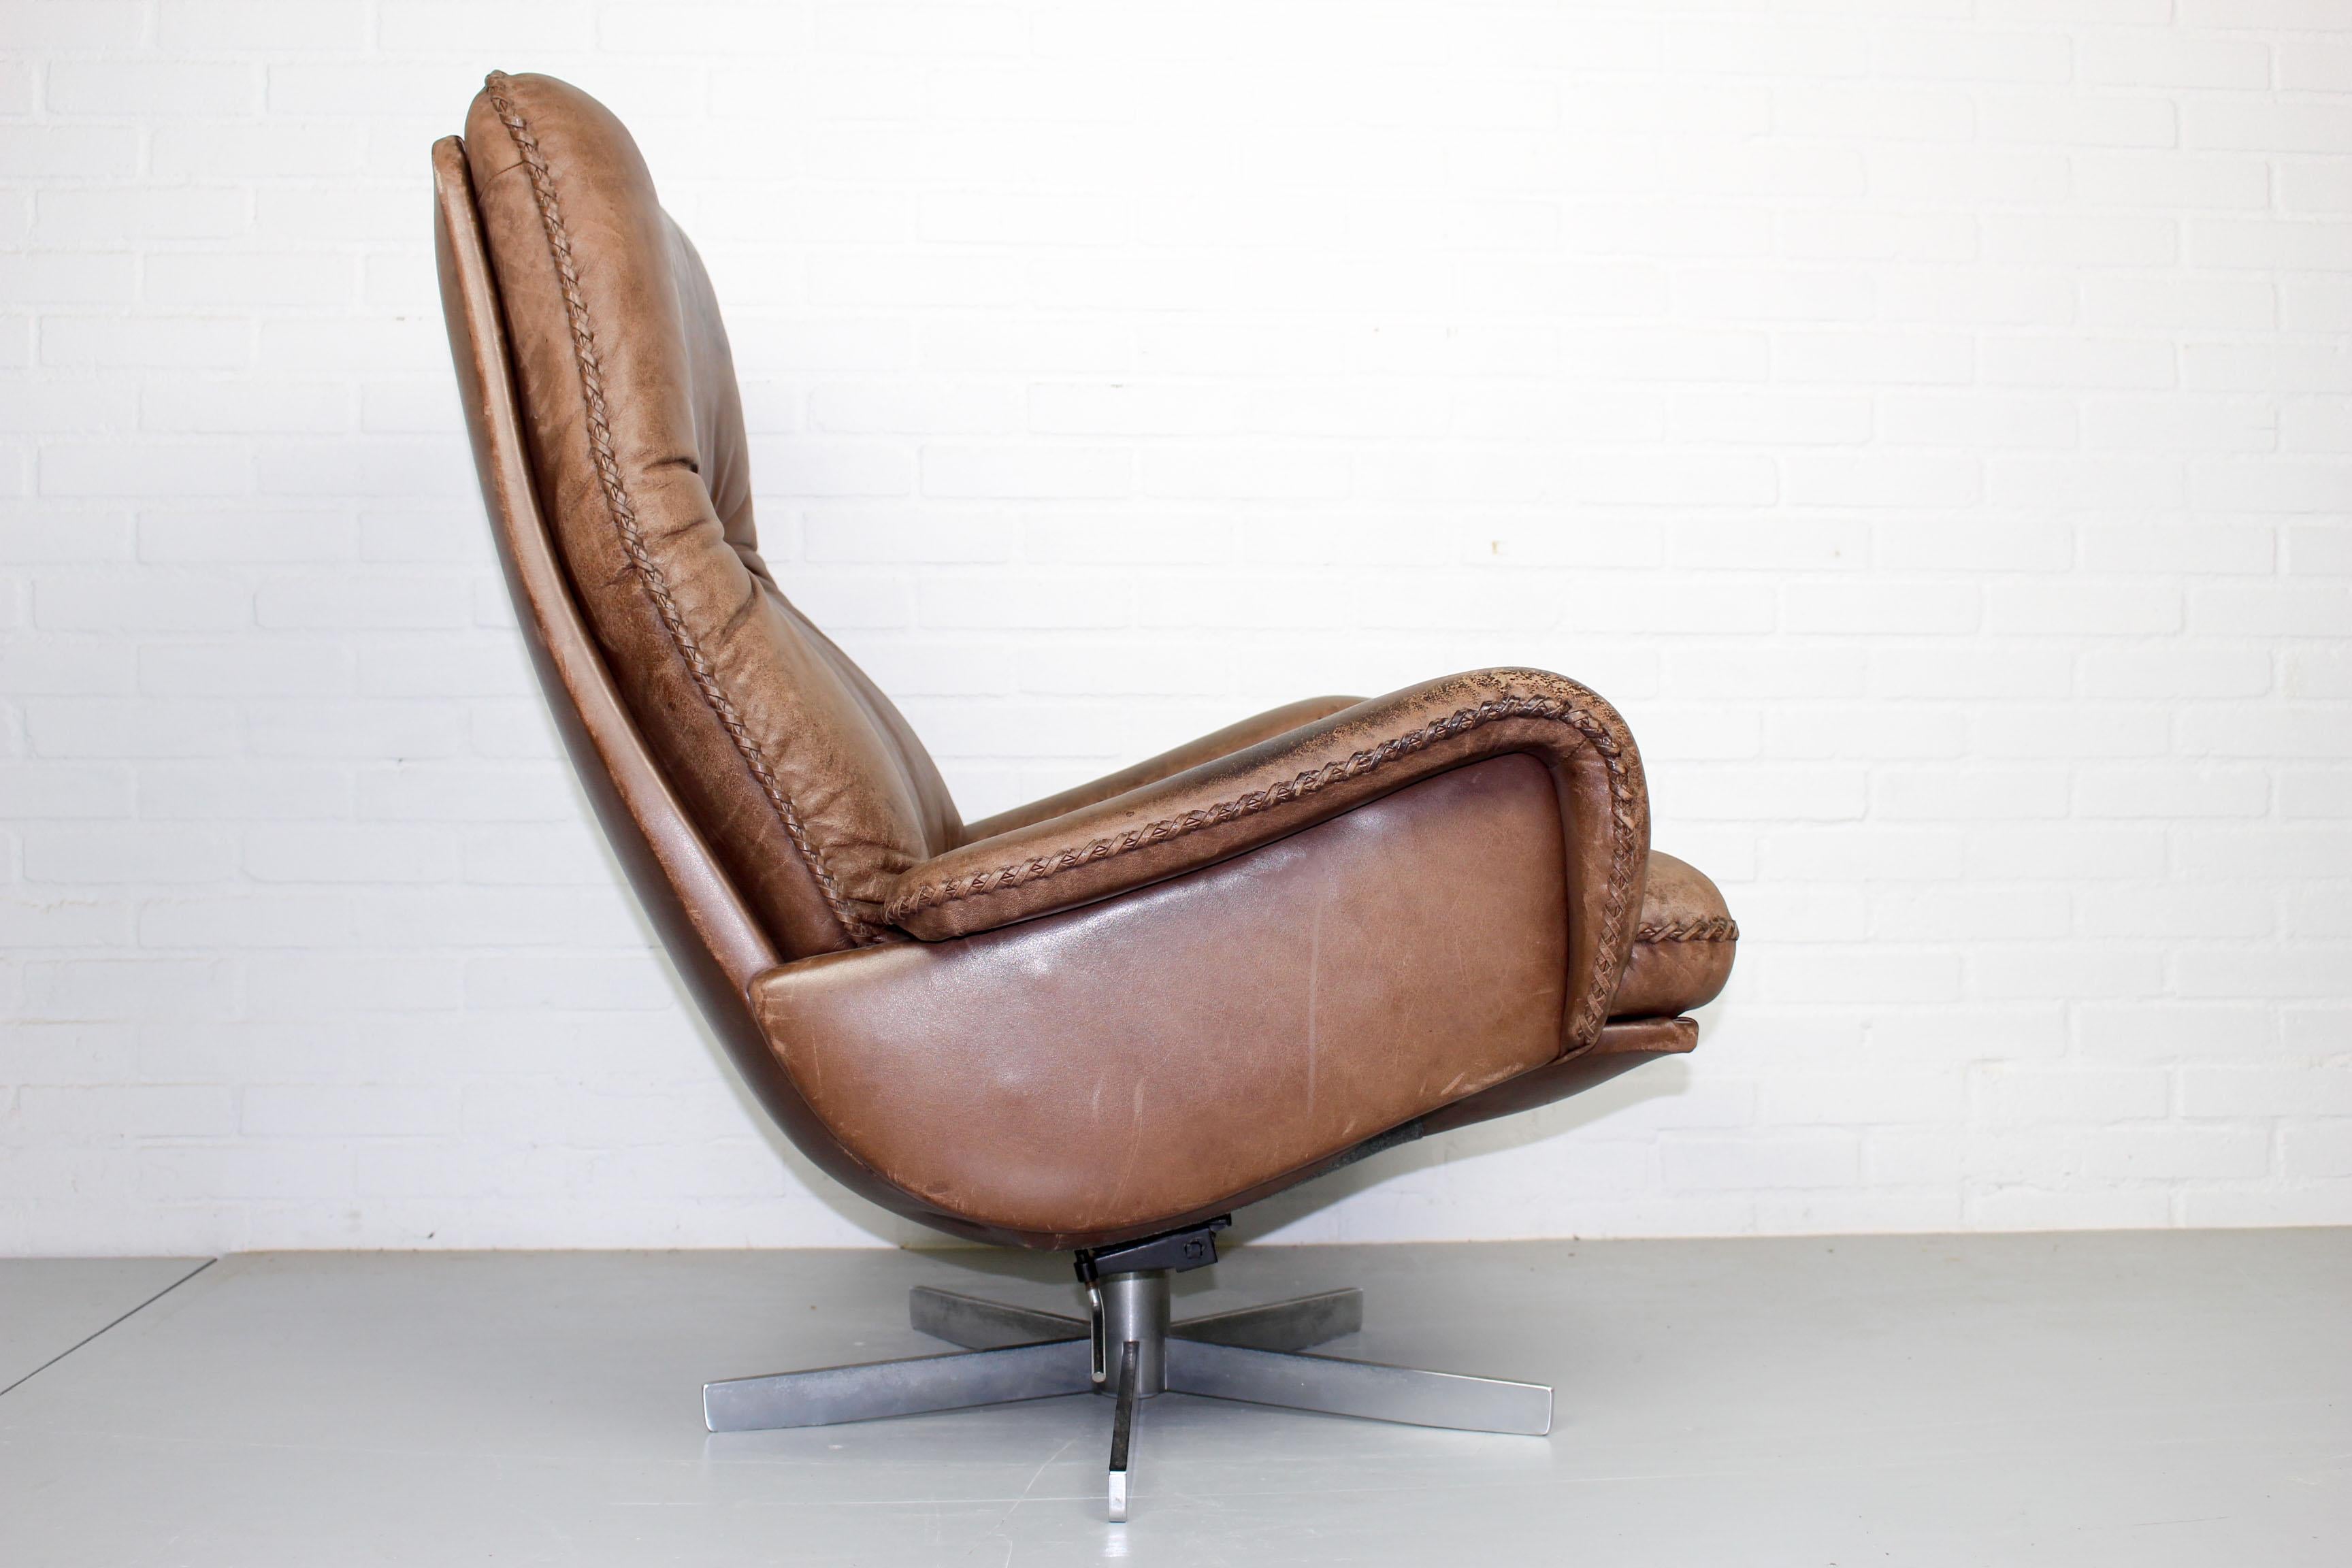 Rare and highly desirable De Sede S 231 lounge swivel club armchair. This chair was produced by De Sede, Switzerland in the late 1960s. In the James Bond film, On Her Majesty’s Secret Service, this chair was used. Upholstered in beautifully aged